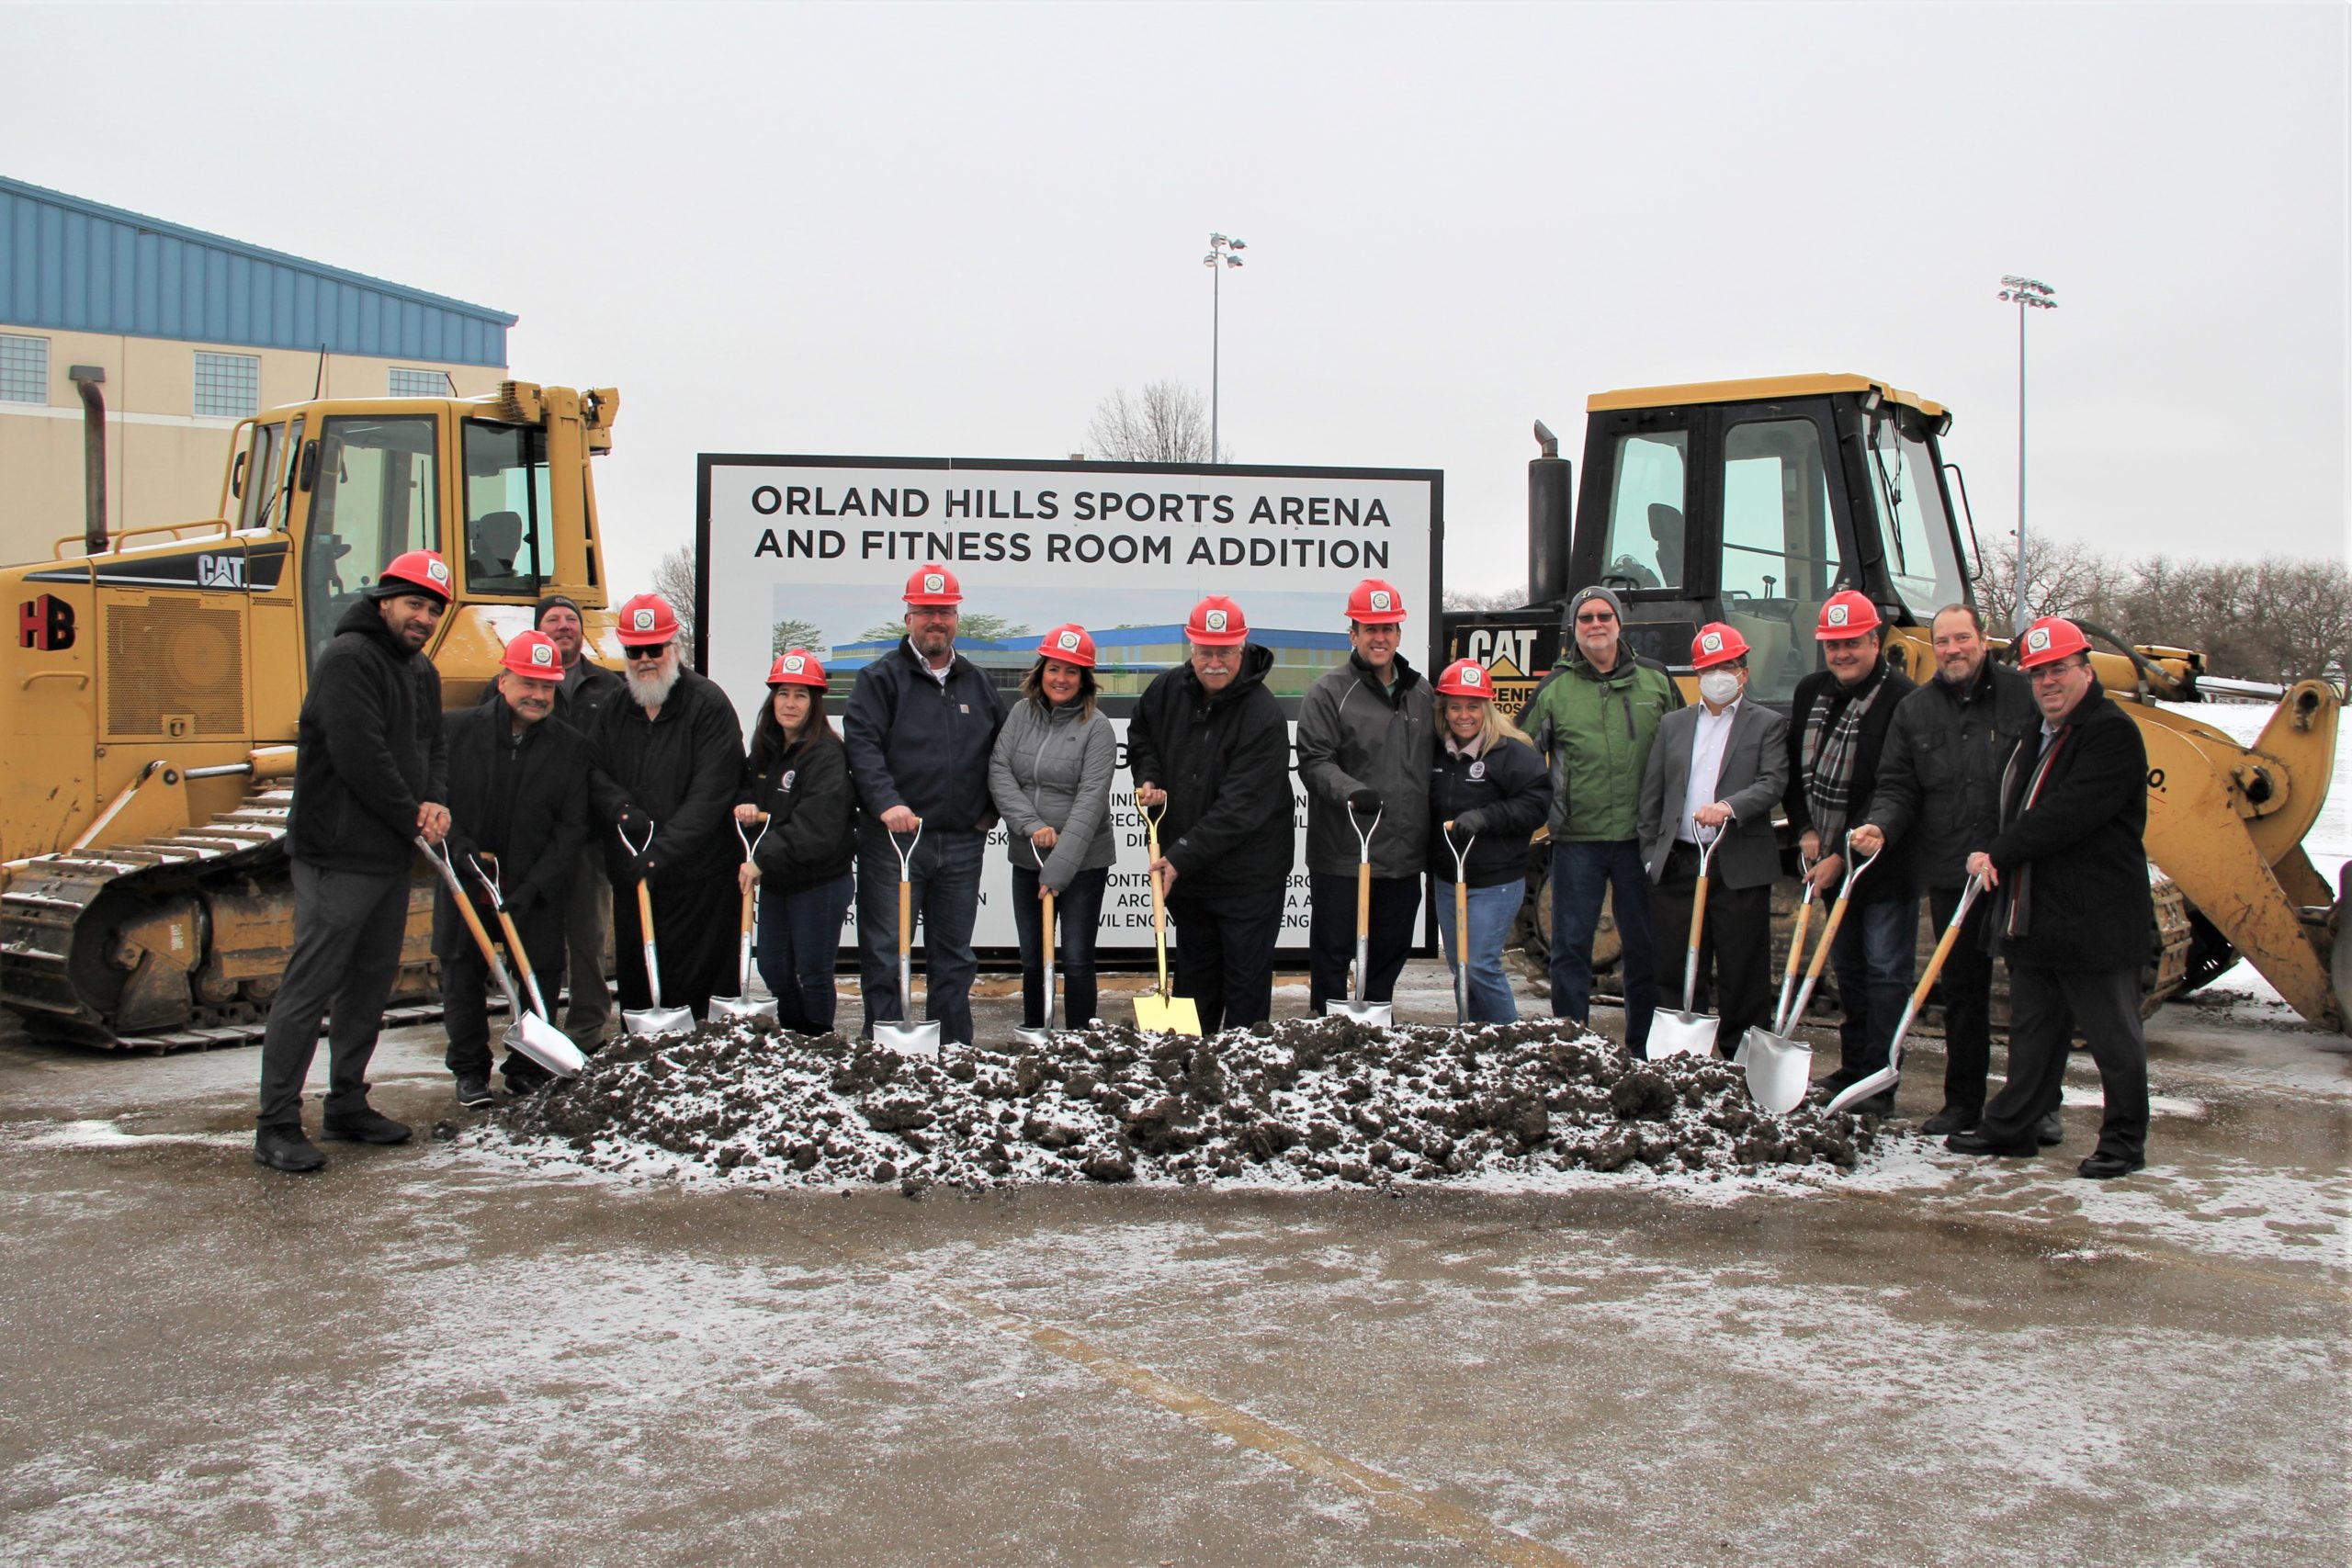 Henry Bros. Co. Breaks Ground for New Sports Arena Addition in Orland Hills